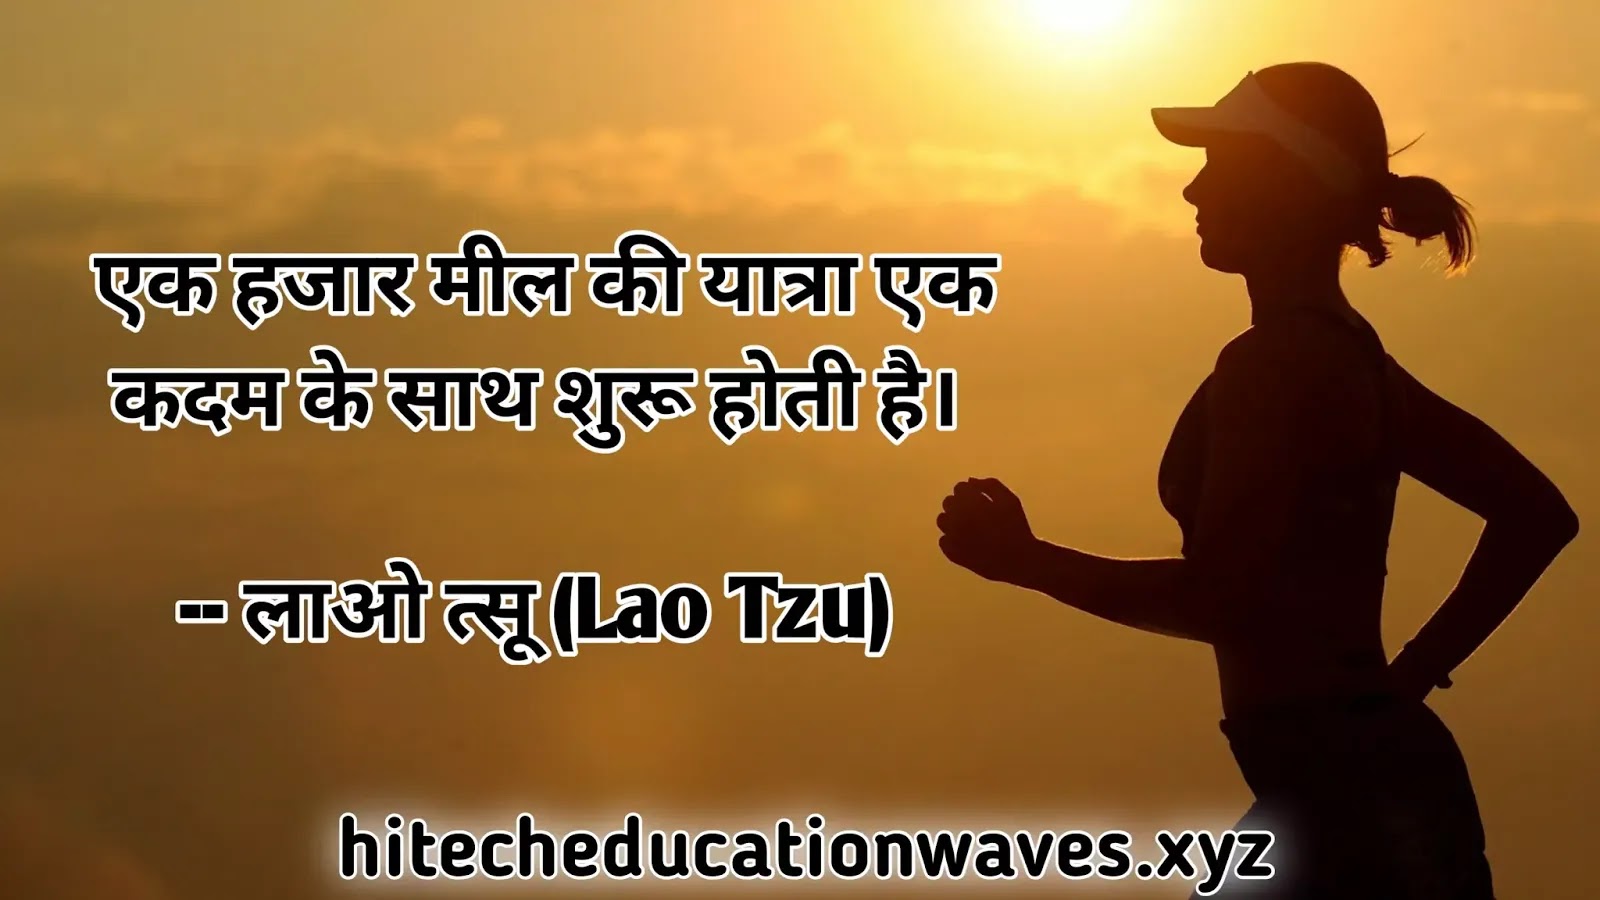 100+ Best Motivational Quotes in Hindi for Success | Hindi Motivational thoughts on Success